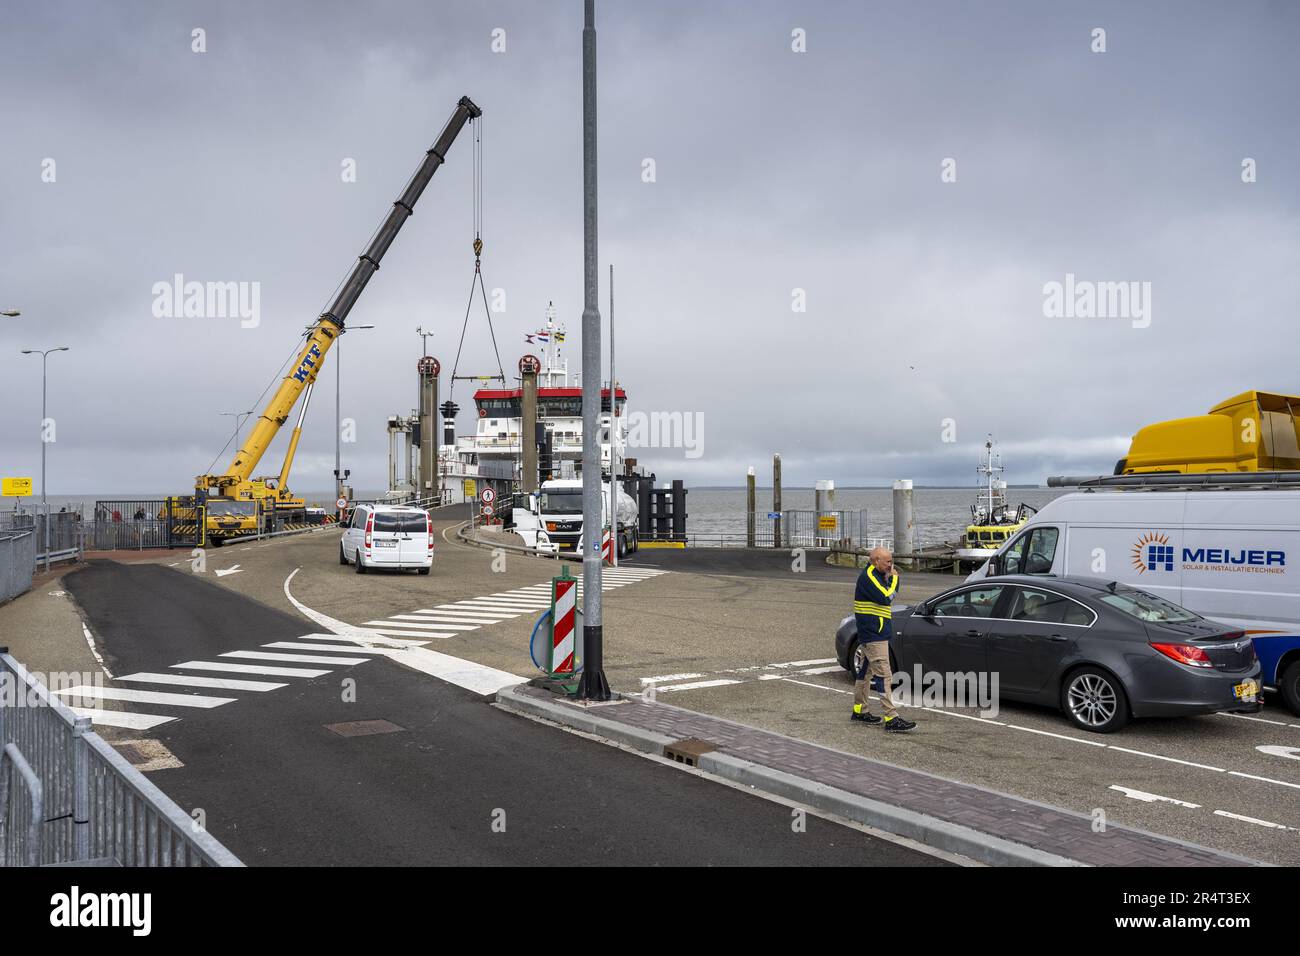 HOLWERT - A crane operates the car bridge so that cars can drive on and off the boat again. The ferry service between the mainland and Ameland has resumed after problems with the car bridge in the harbor of Holwert prevented travelers from disembarking with a car, so they were taken back to Ameland. ANP JILMER POSTMA netherlands out - belgium out Stock Photo